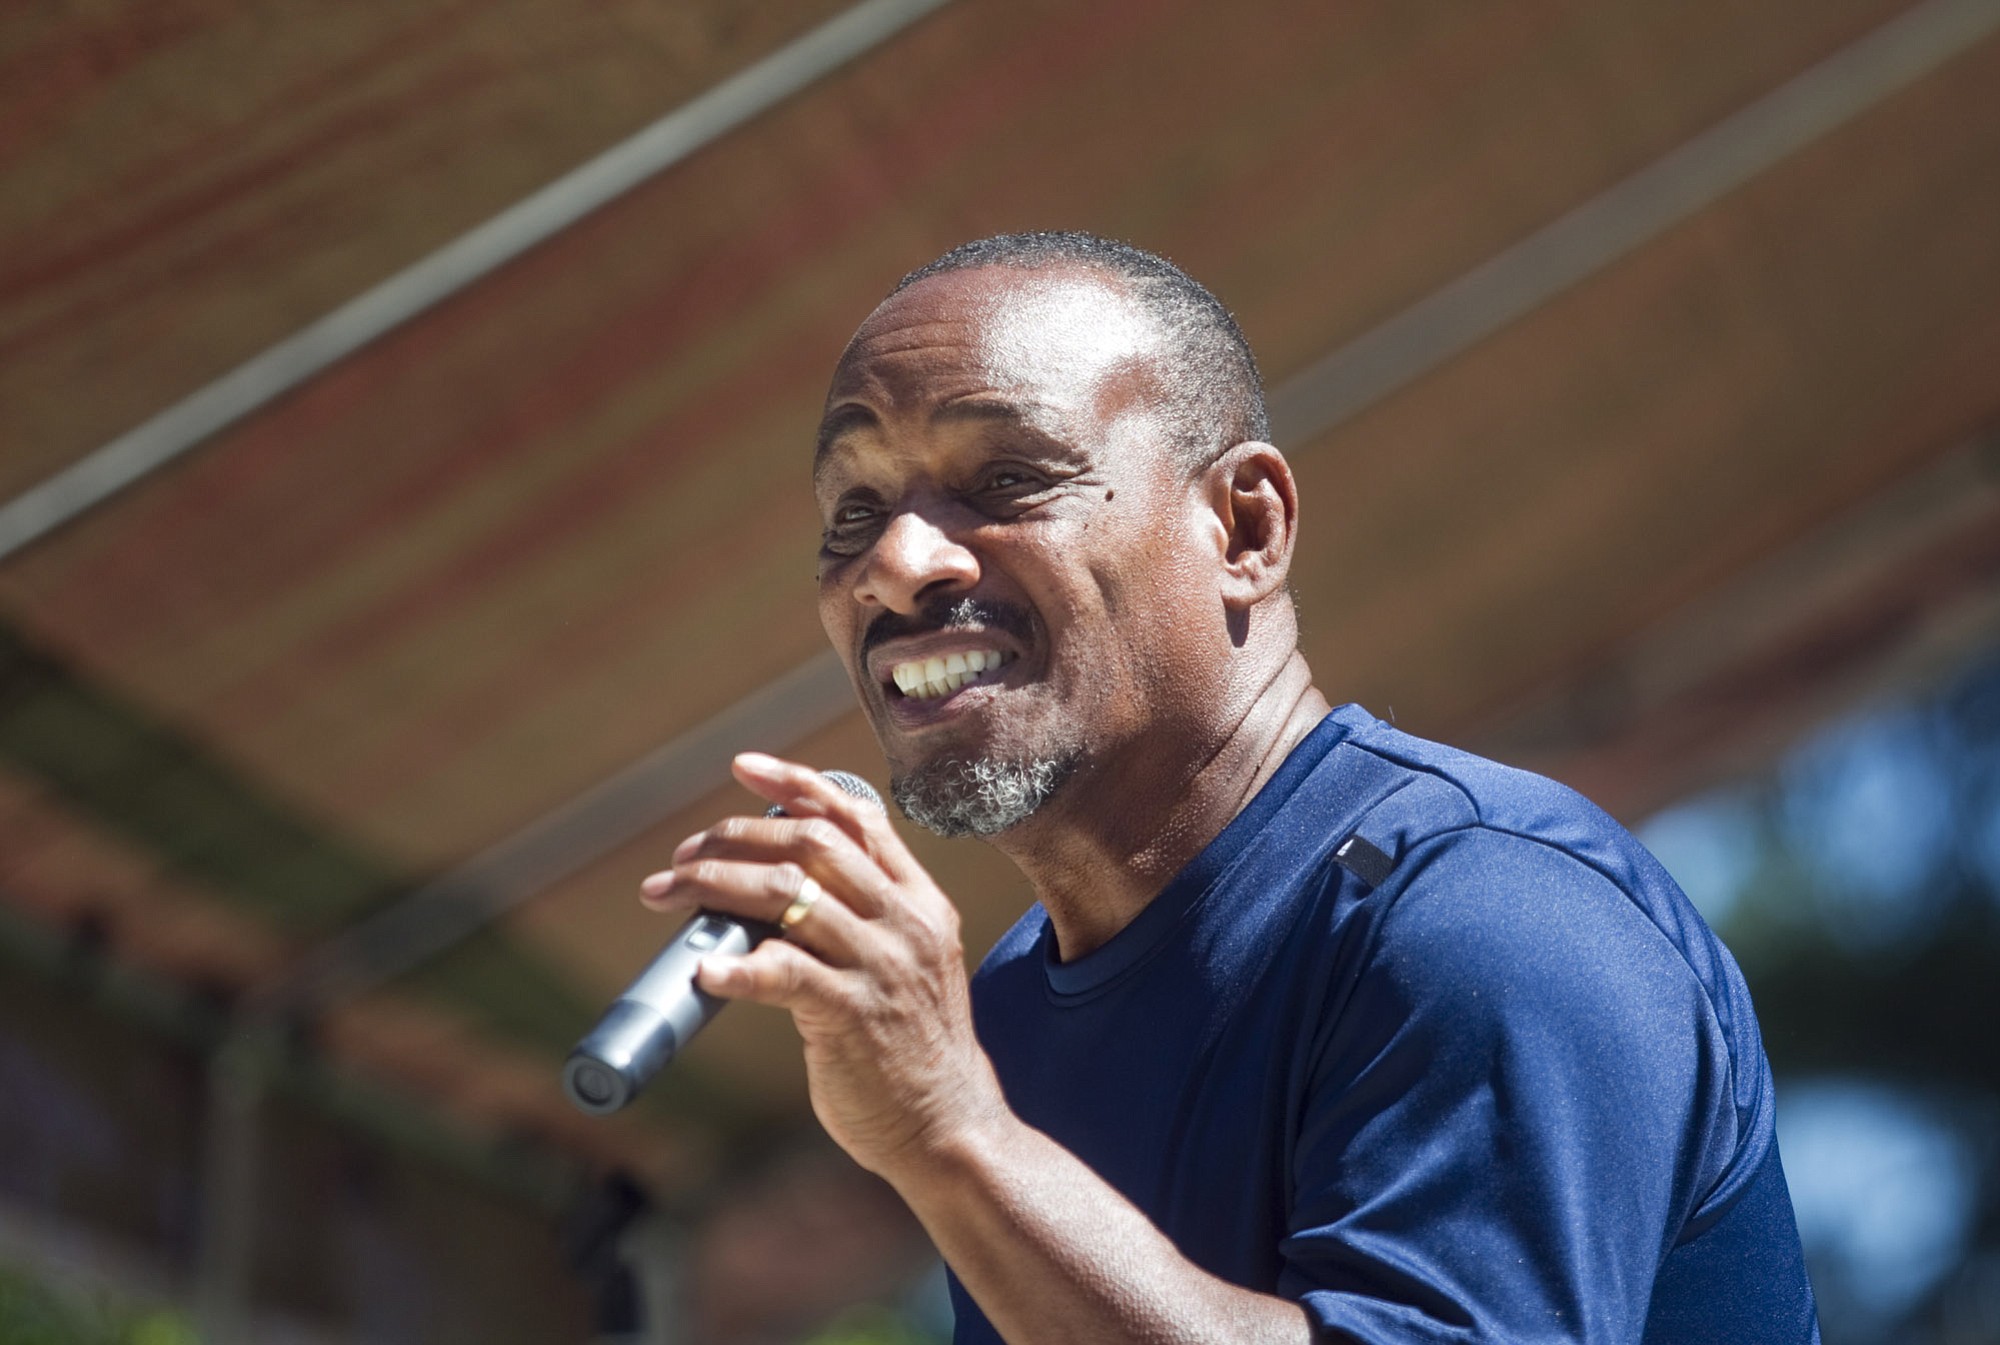 Curtis Nettles entertains the crowd at the third annual &quot;Back in the Day&quot; reunion Saturday at Marshall Park in Vancouver.